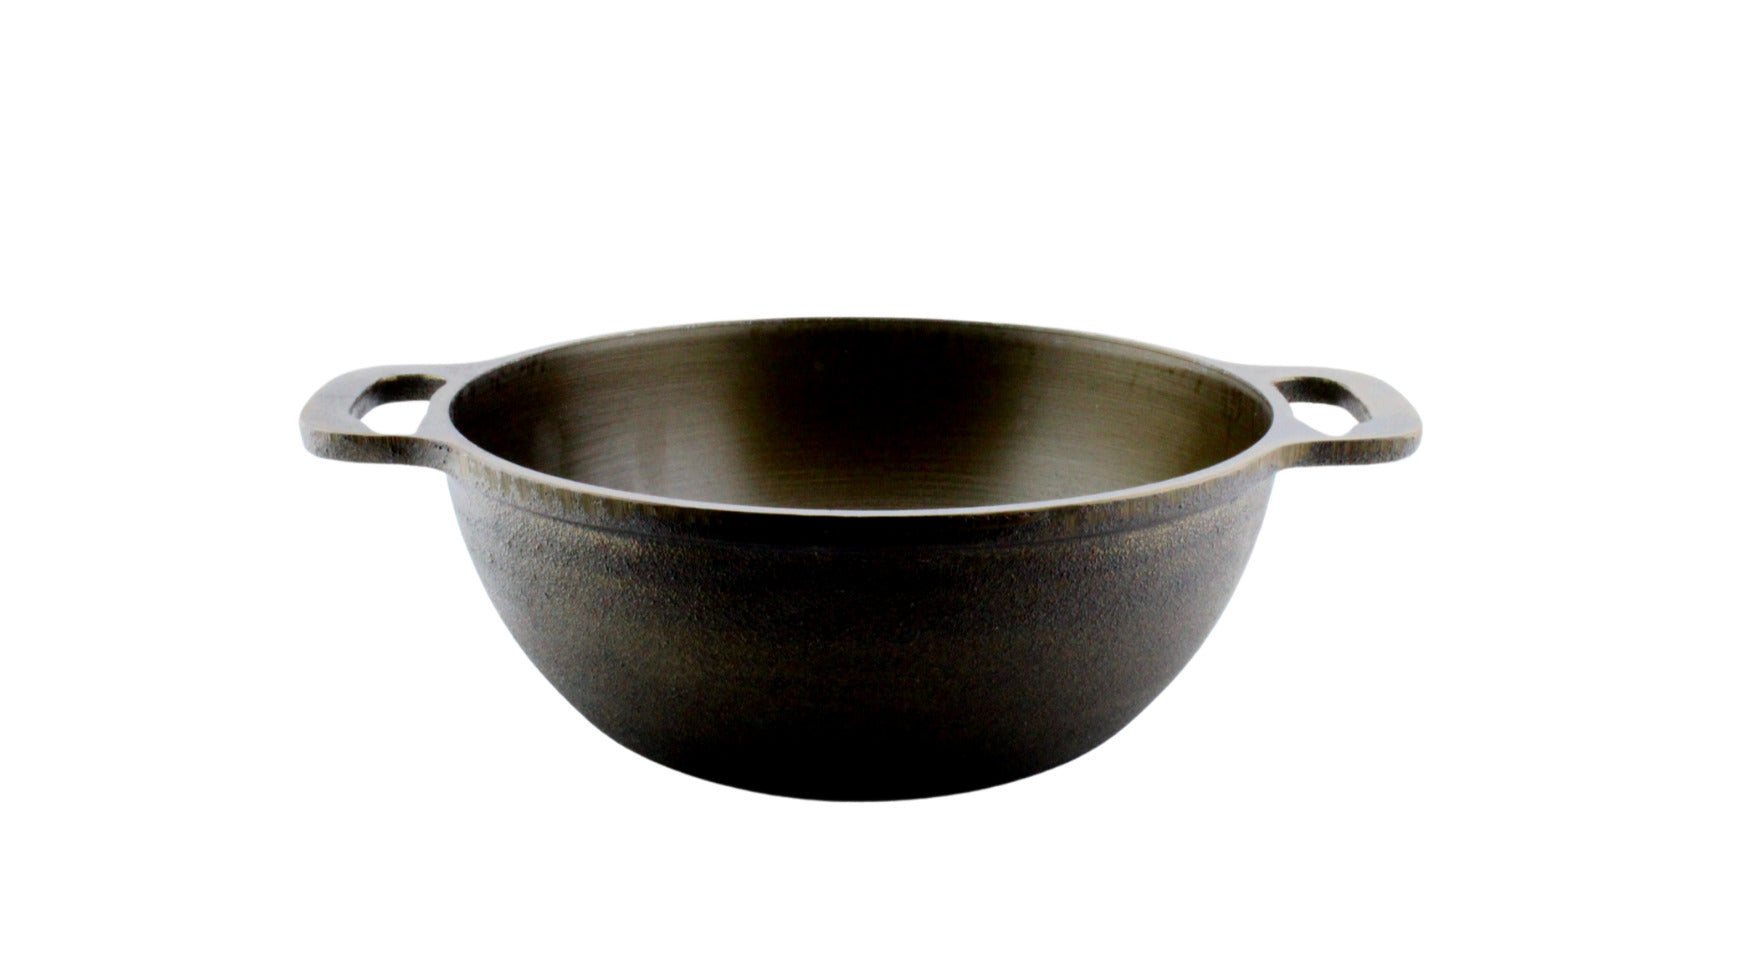 Cast Iron Kadhai With Lid | Machined Smooth | 10 Inches | 2.54 KG TRILONIUM | Cast Iron Cookware